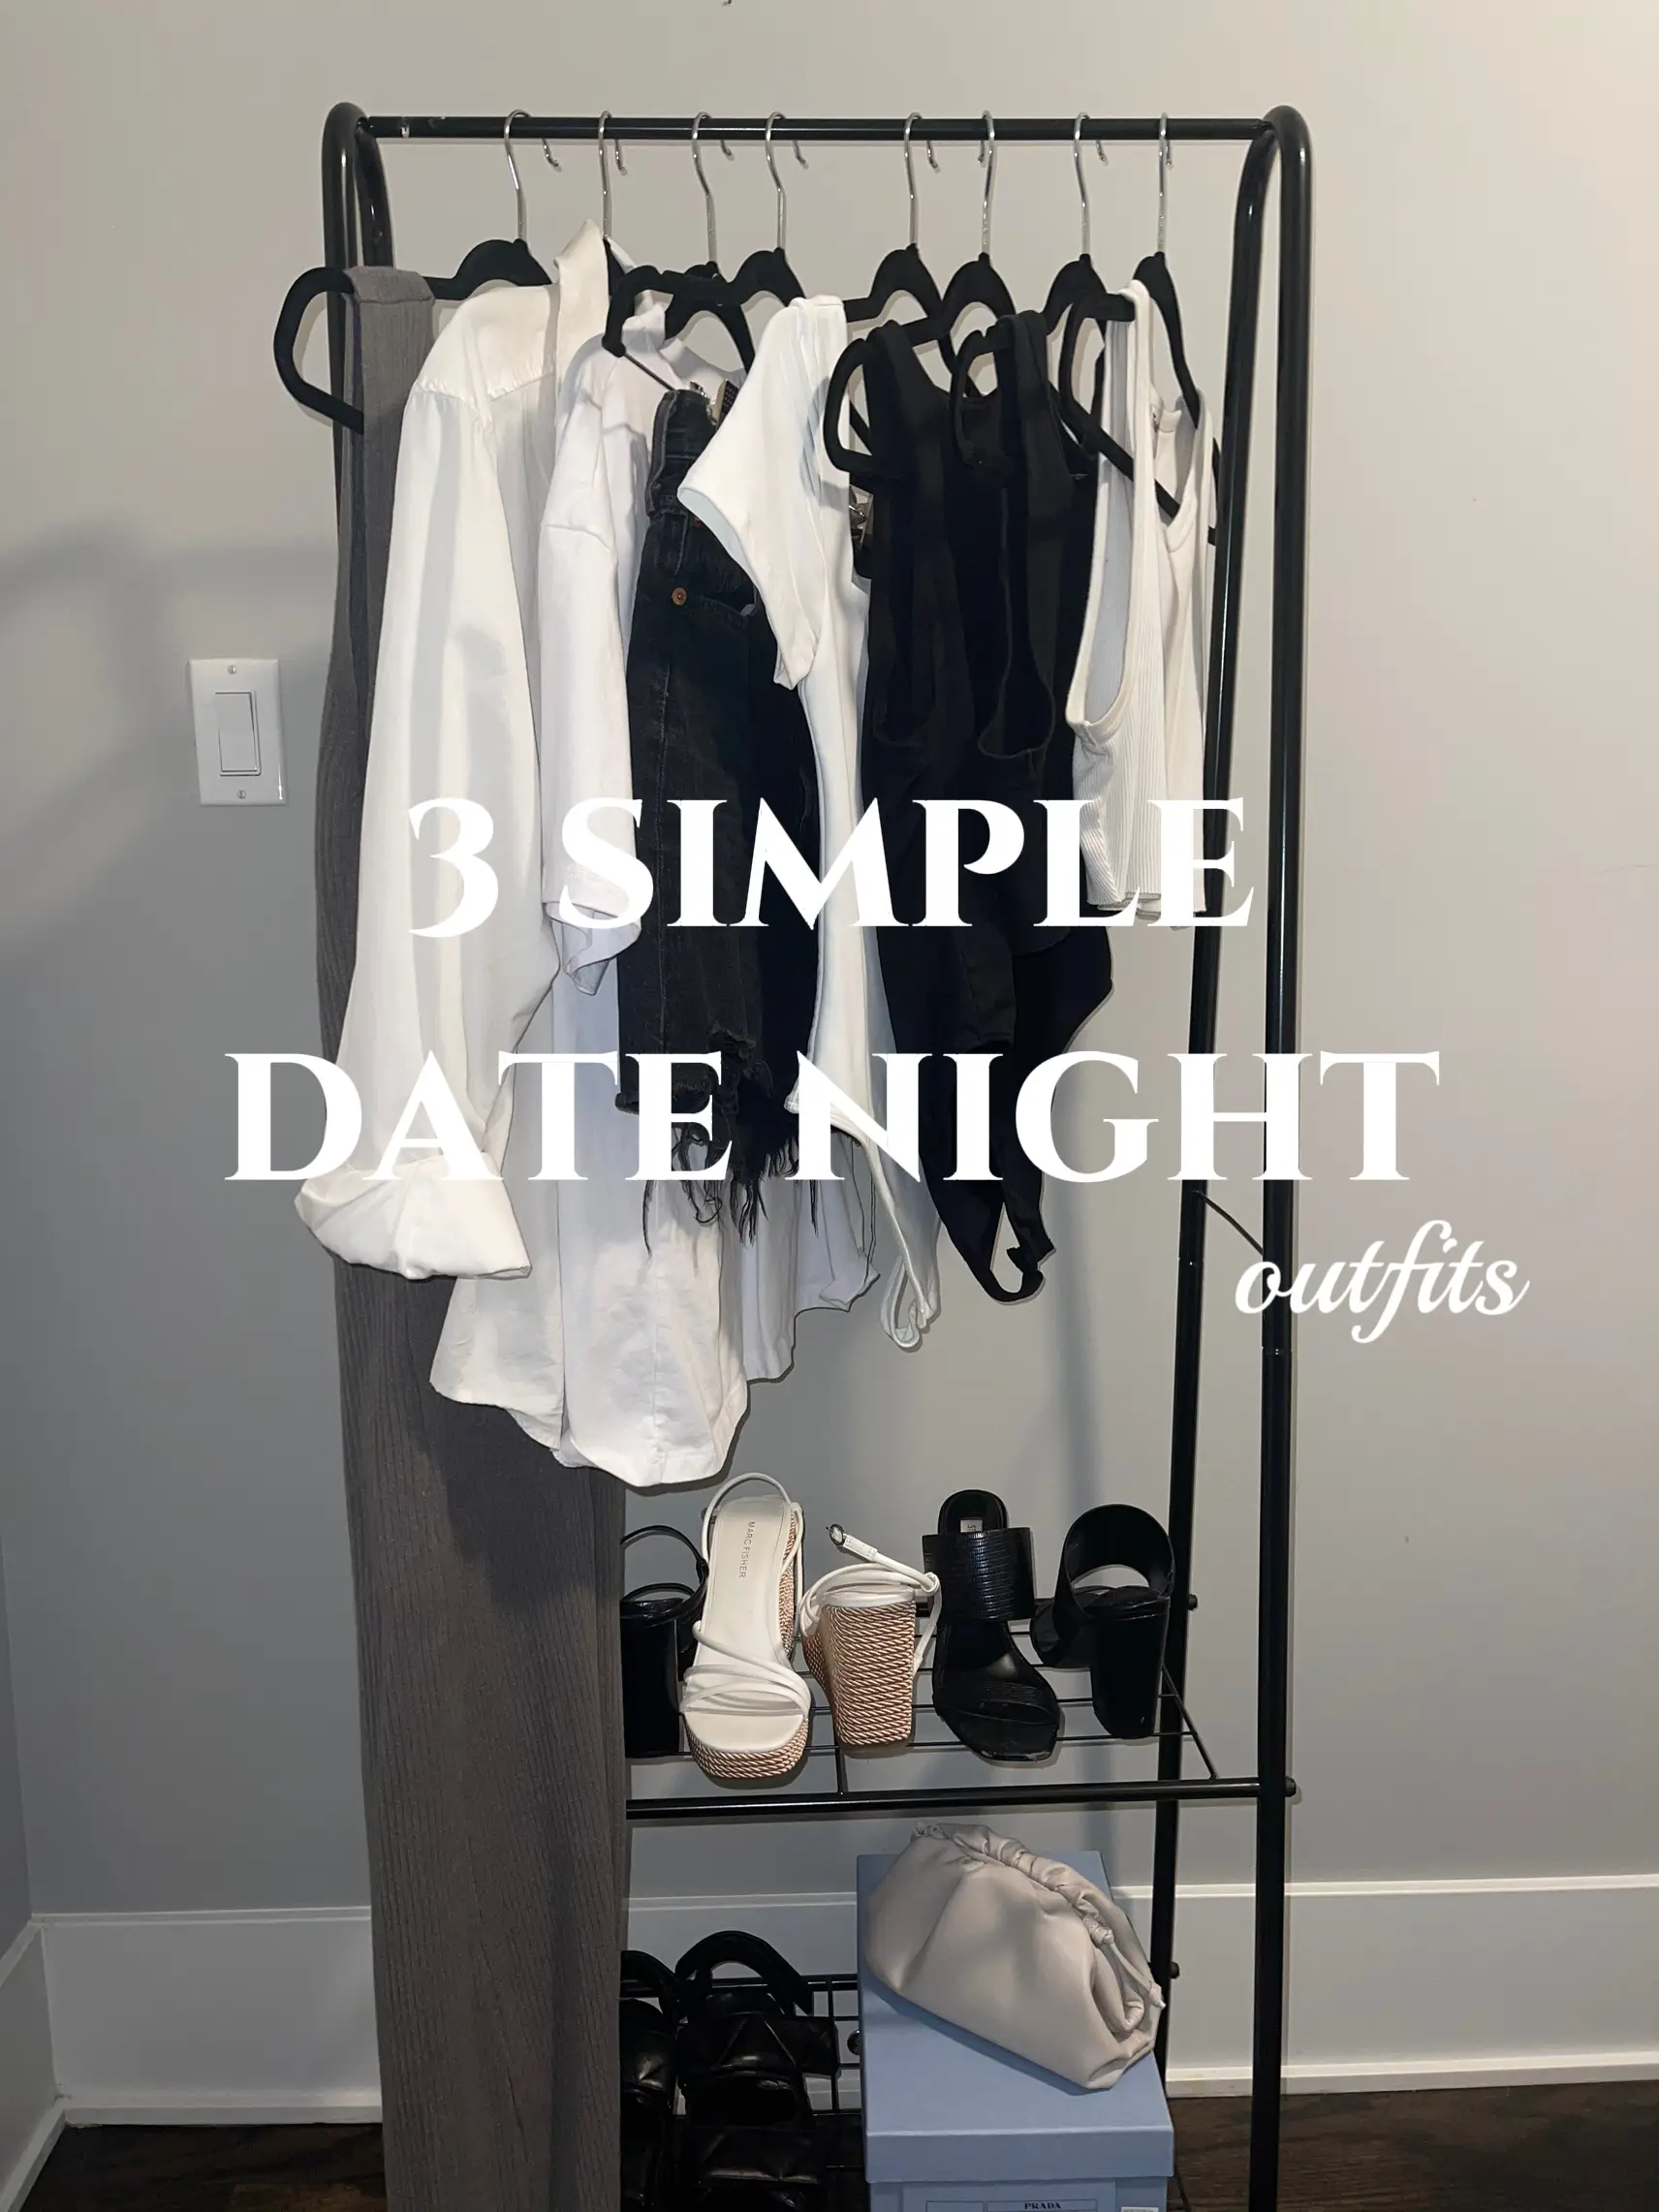 3 Simple Date Night Looks, Gallery posted by Byanca Simon